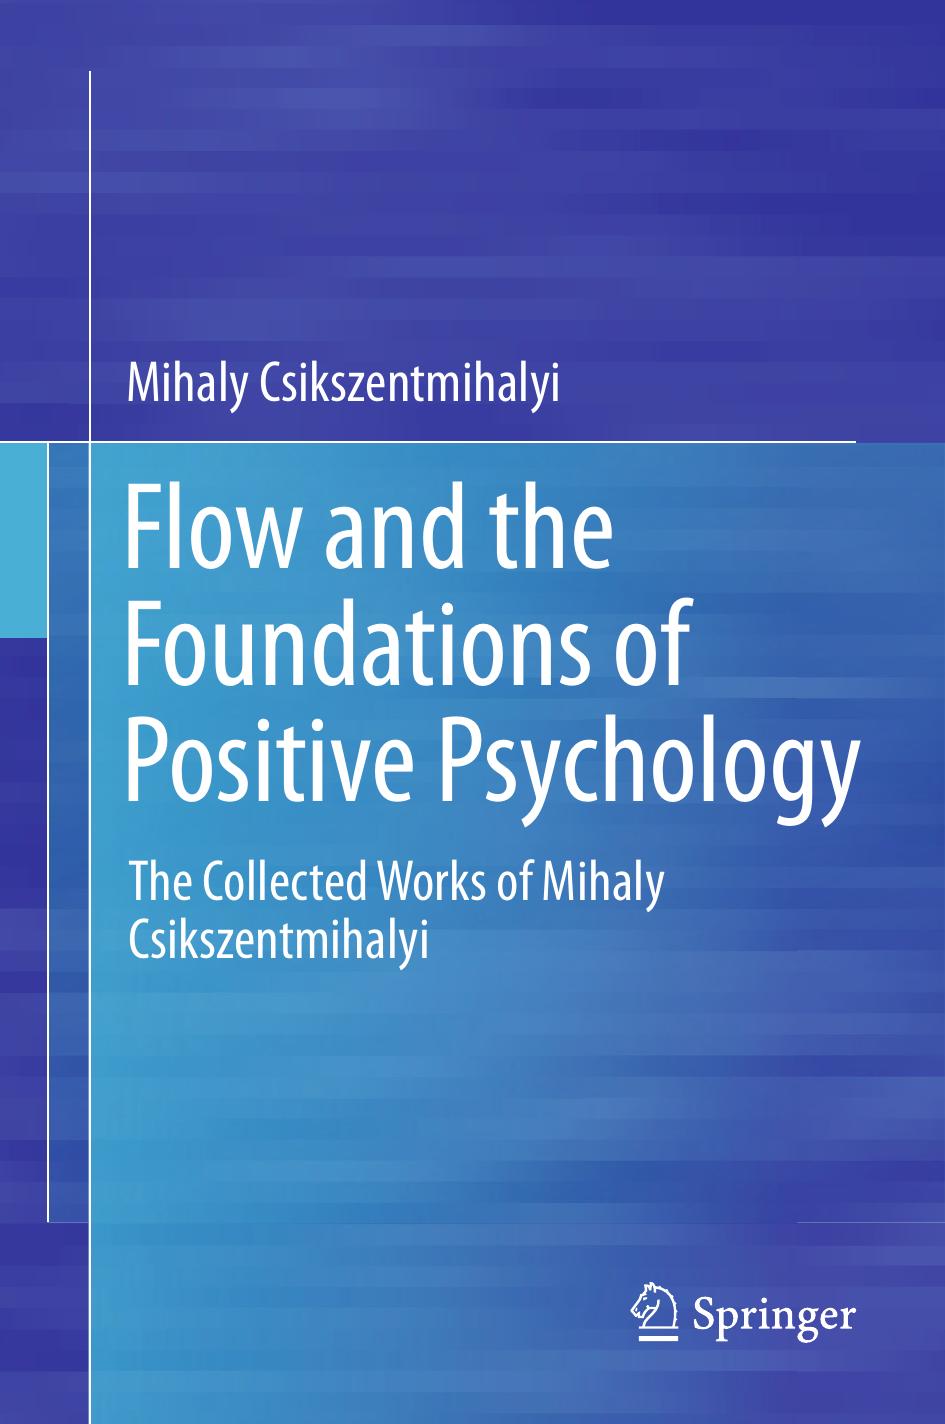 Flow and the Foundations of Positive Psychology 2014